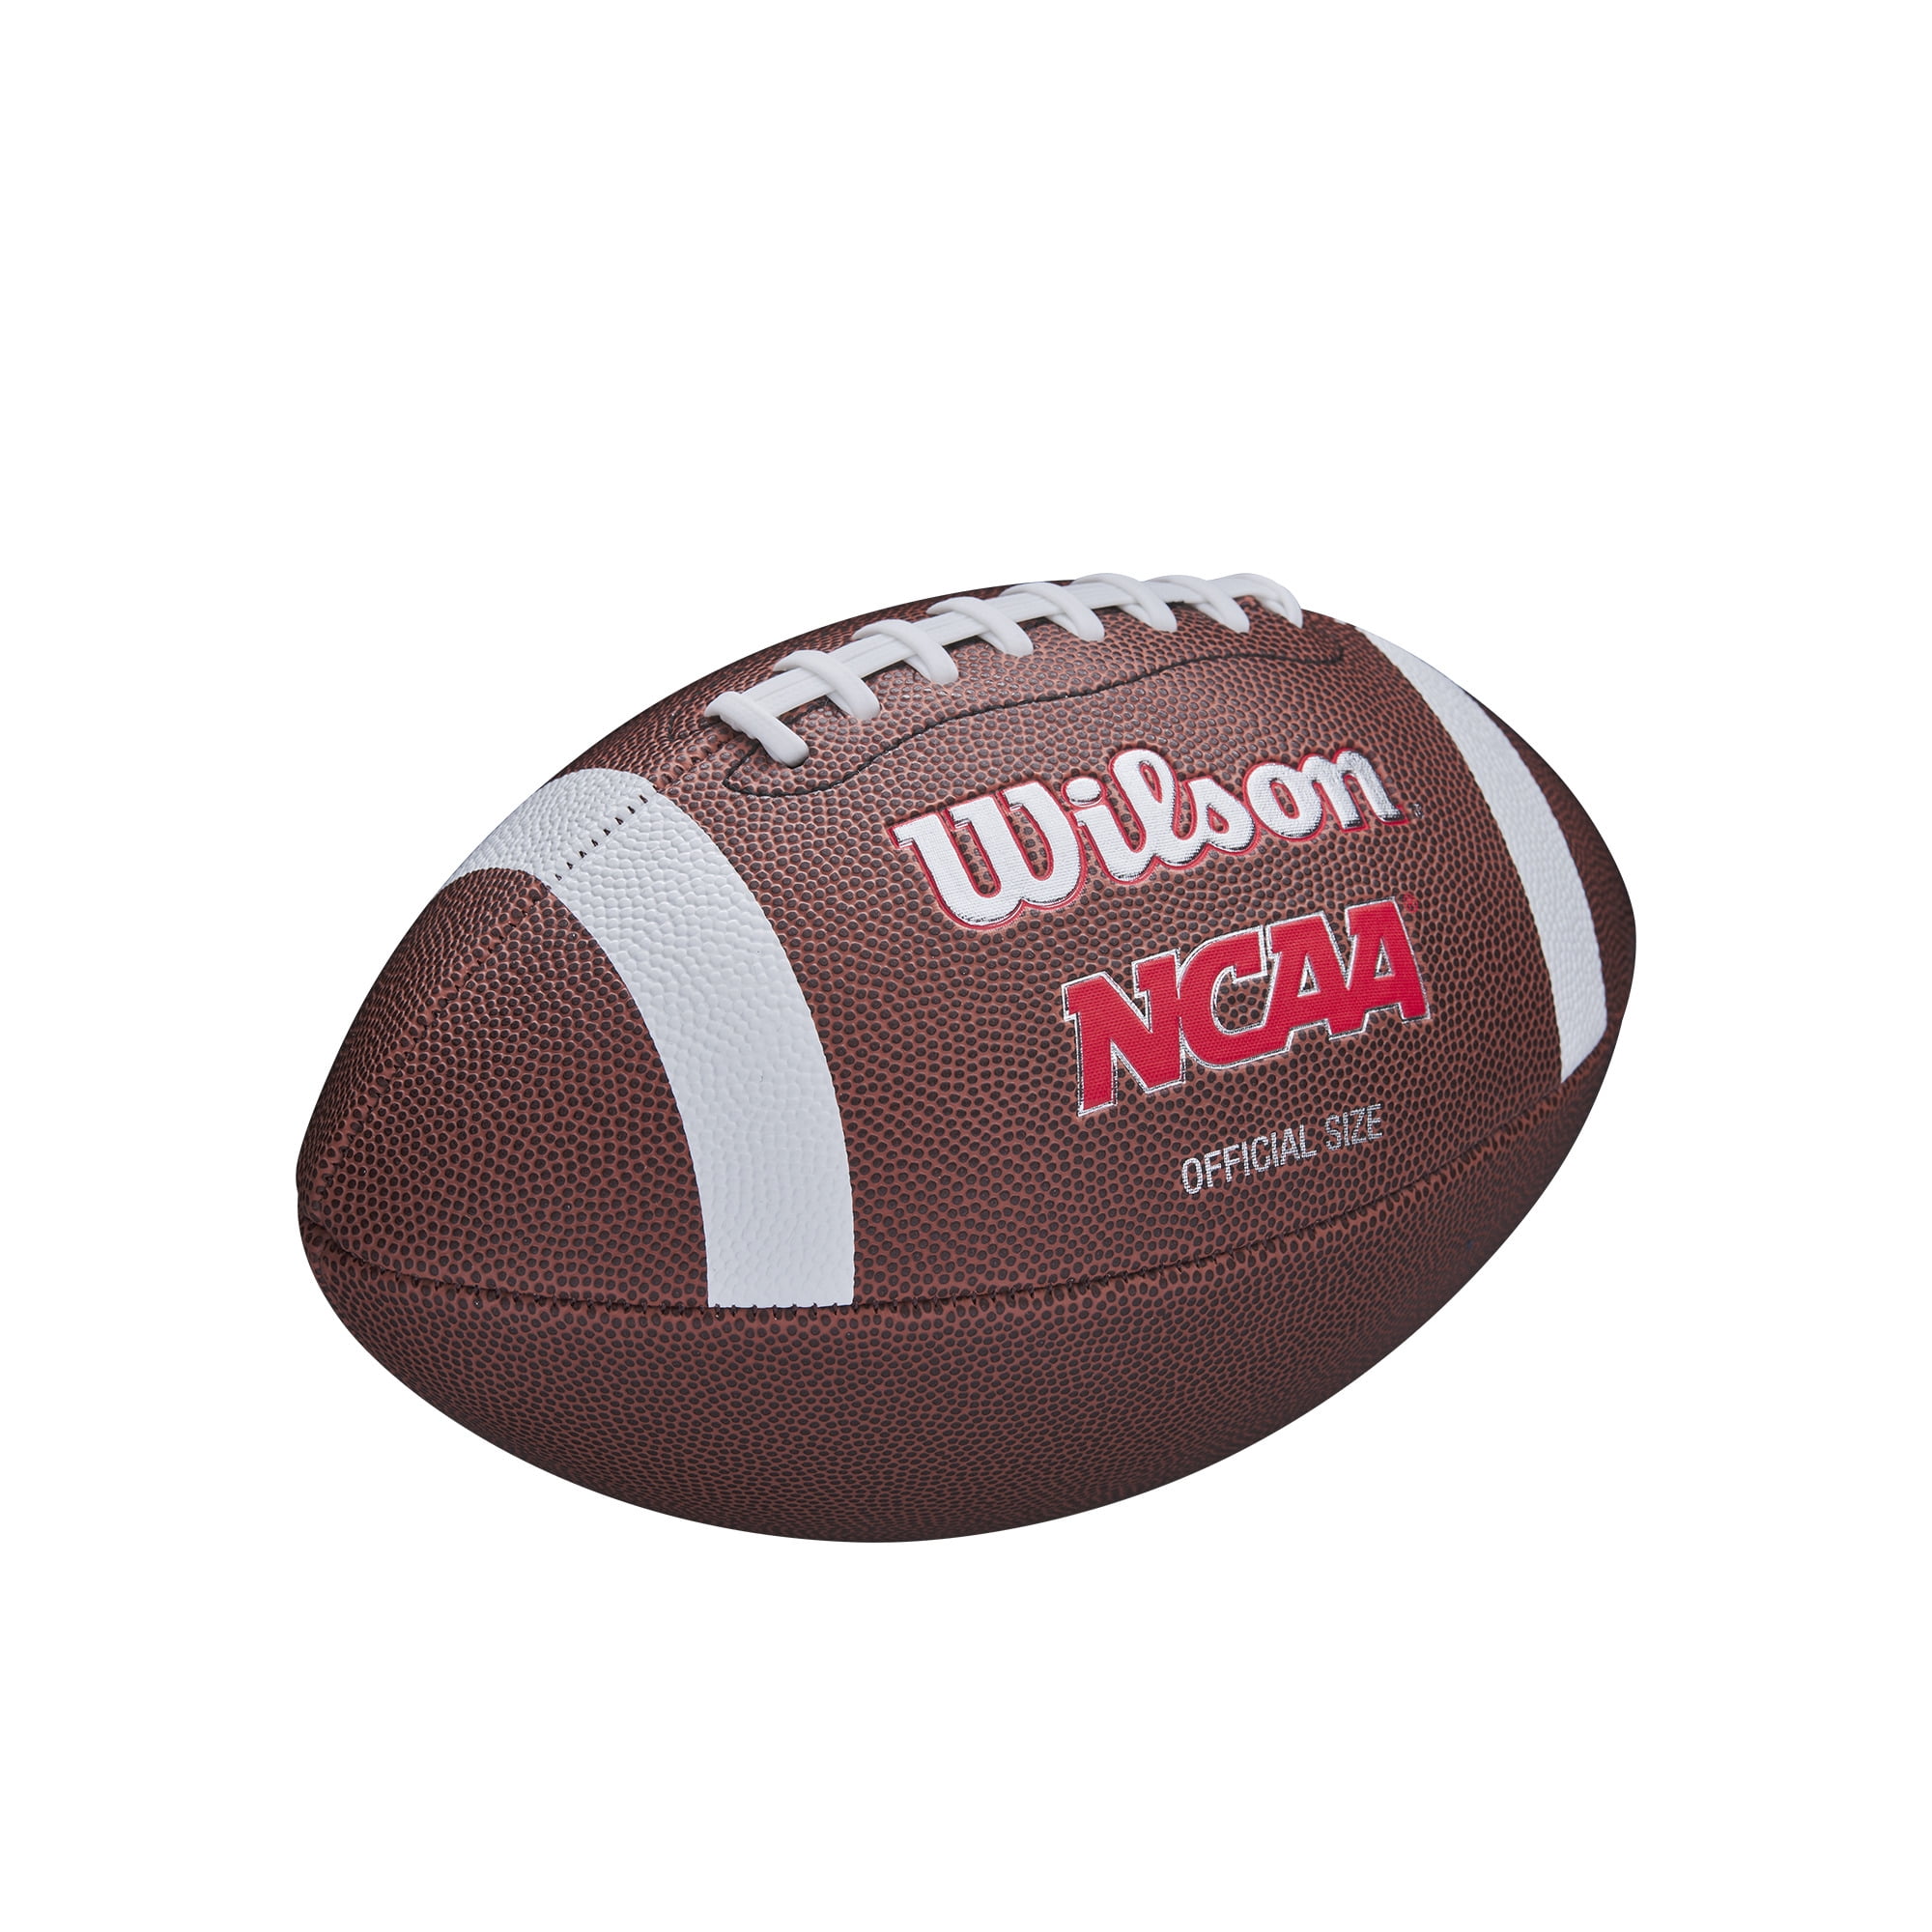 Composite Leather Details about   Wilson NCAA Red Zone Series Composite Football Official Size 